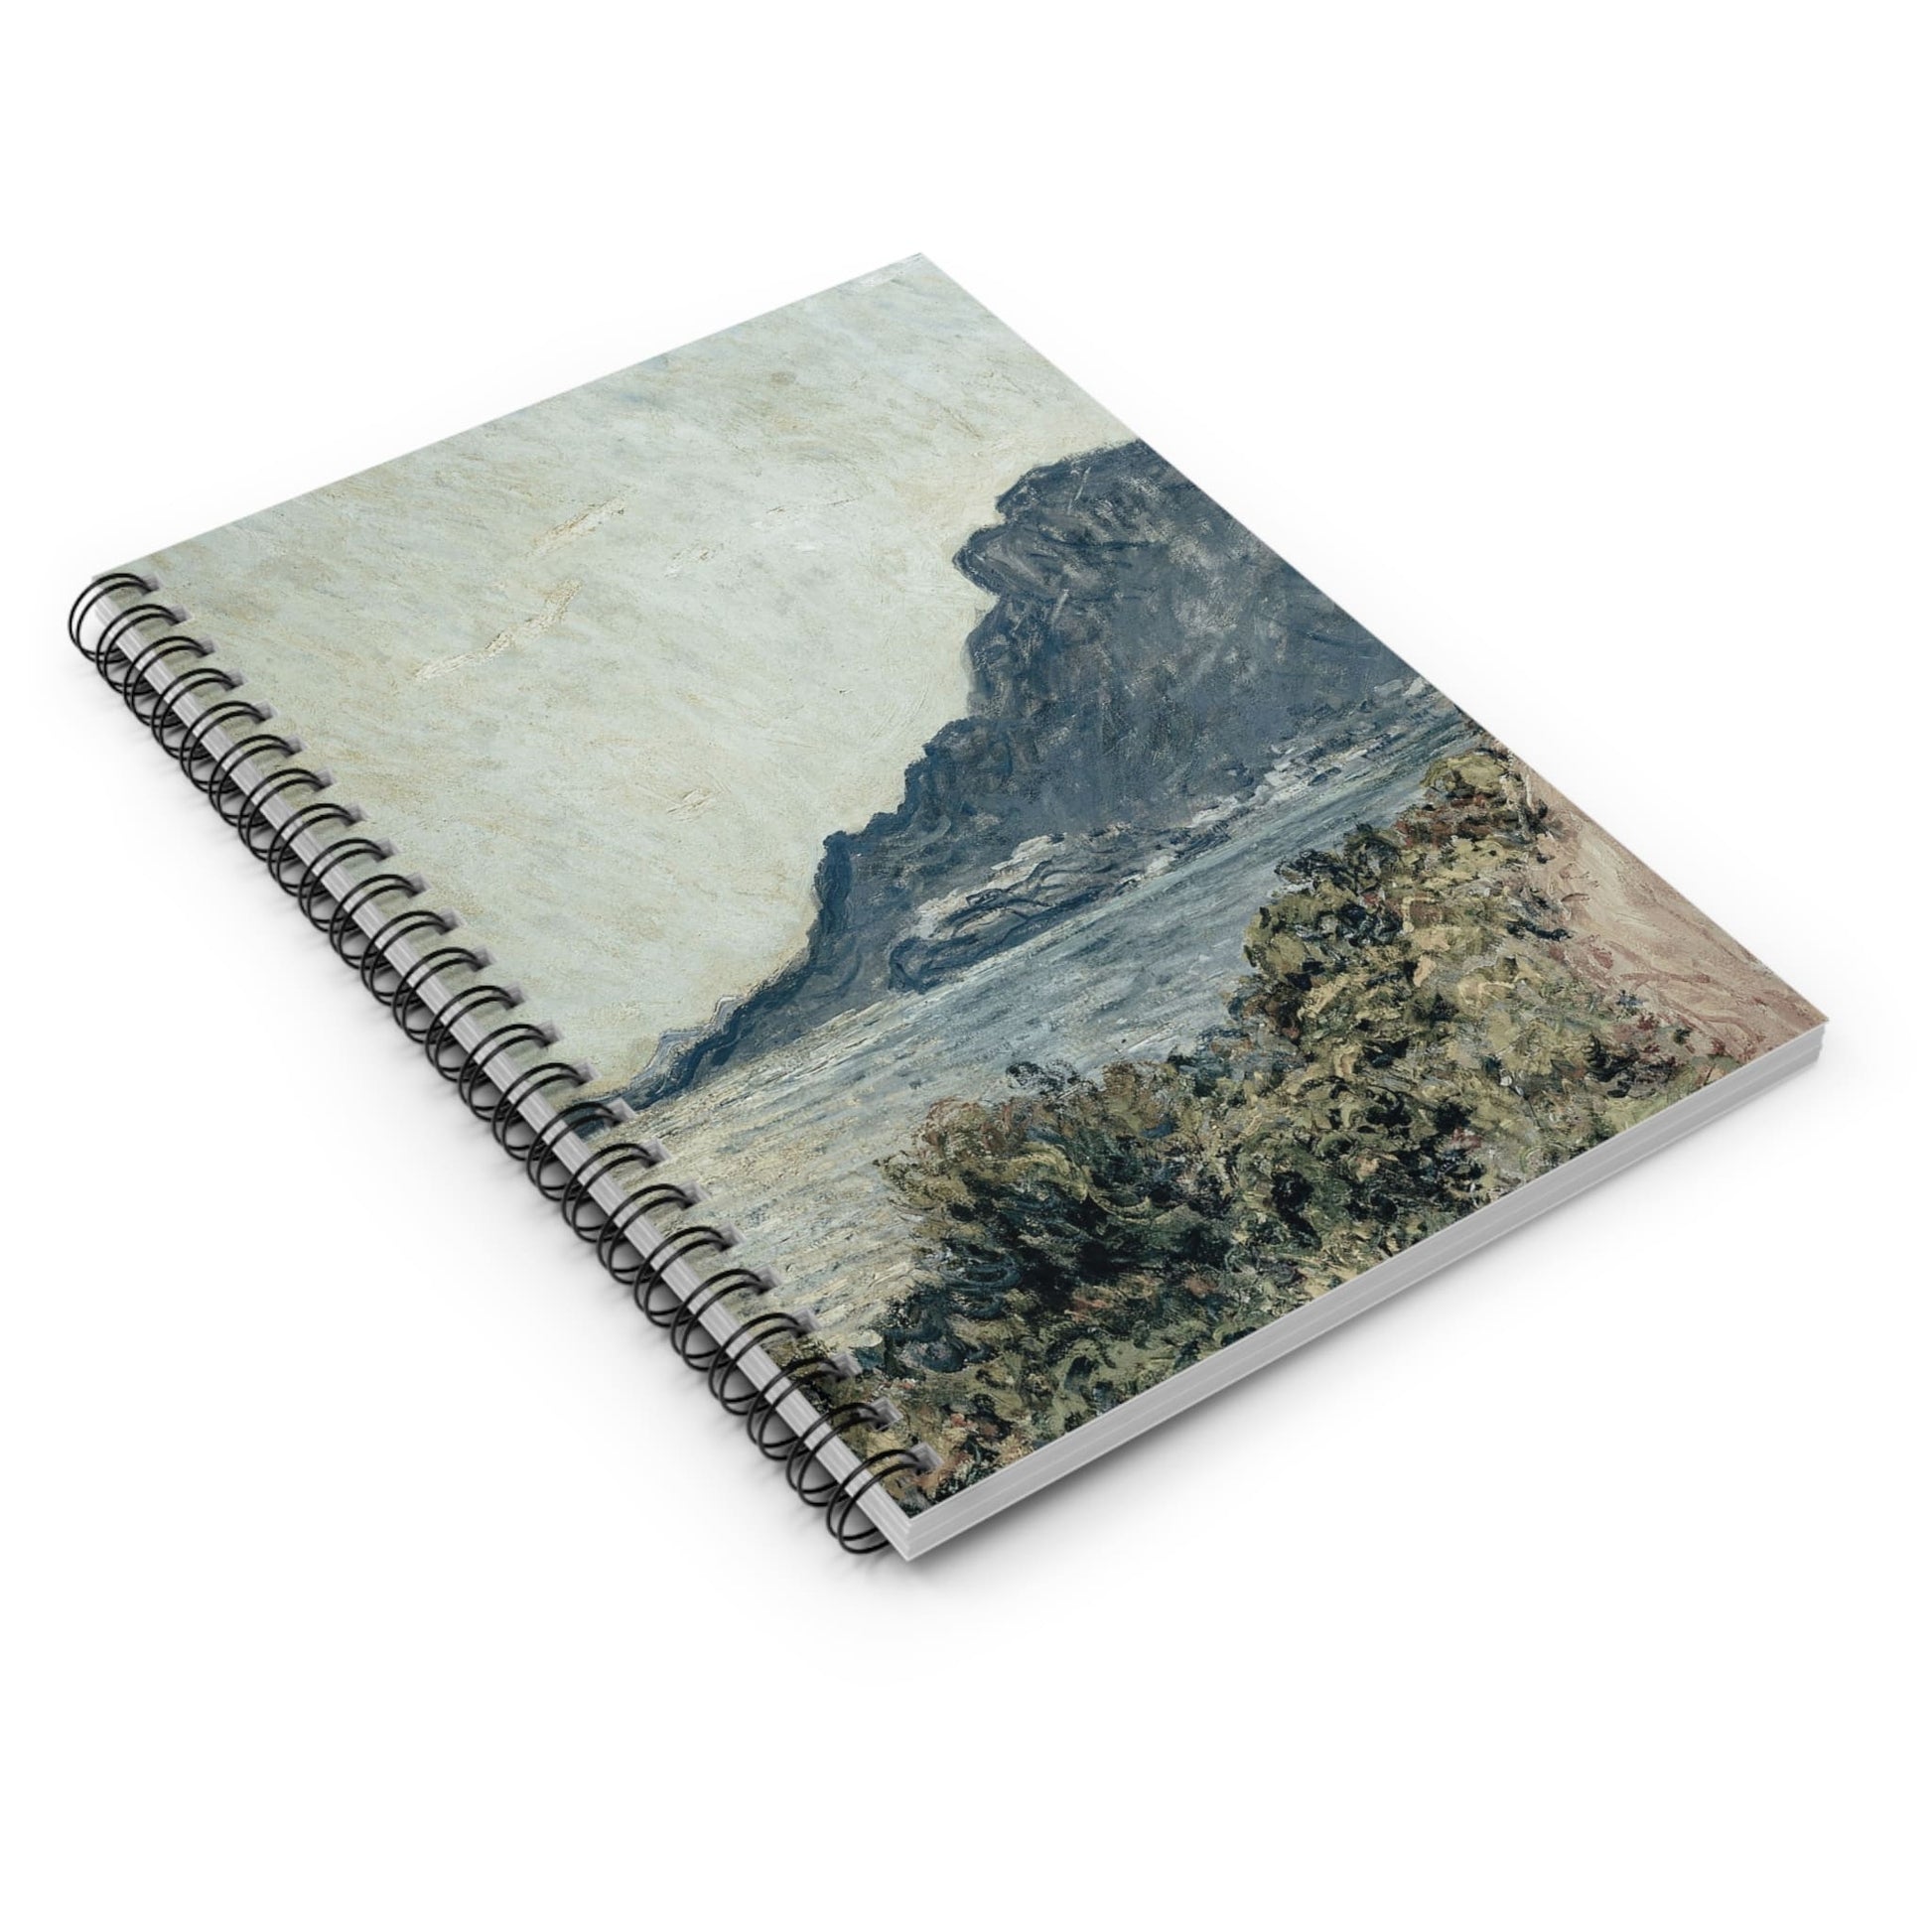 Ocean Scenery Spiral Notebook Laying Flat on White Surface